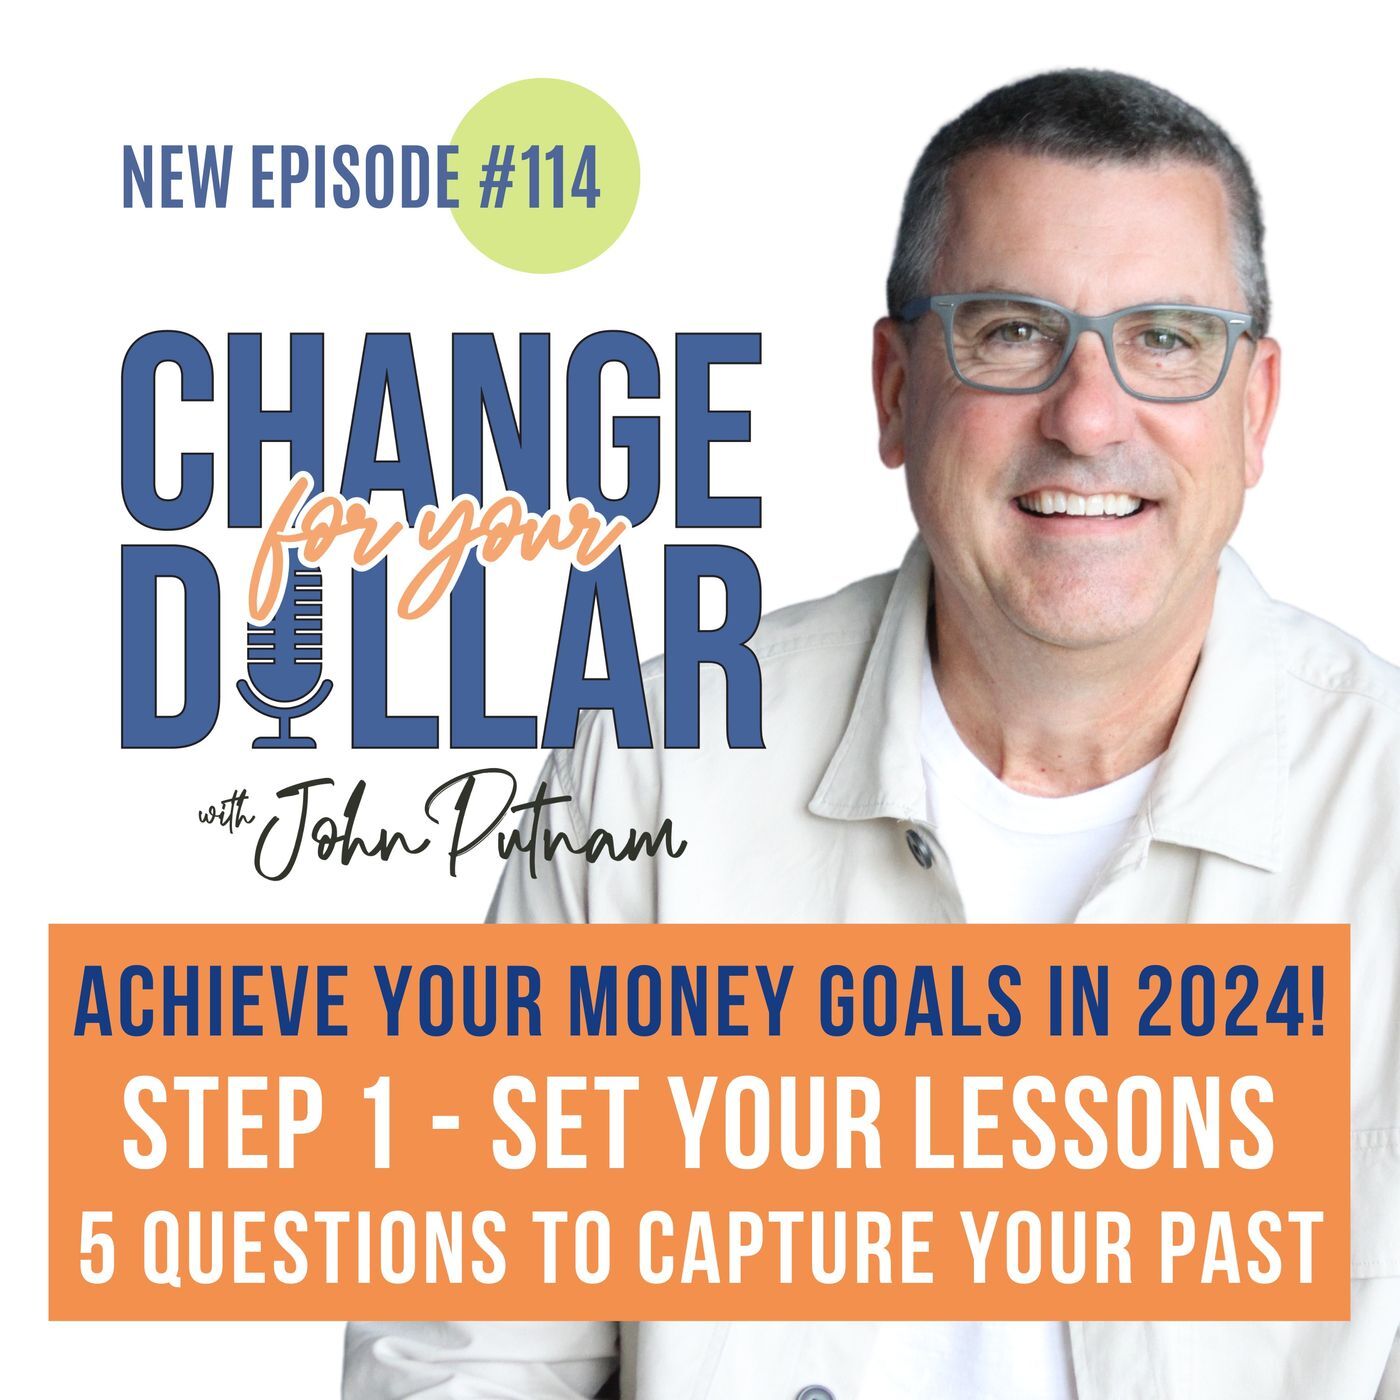 114 - Achieve your Money Goals in 2024! Step 1 - SET YOUR LESSONS with 5 Questions